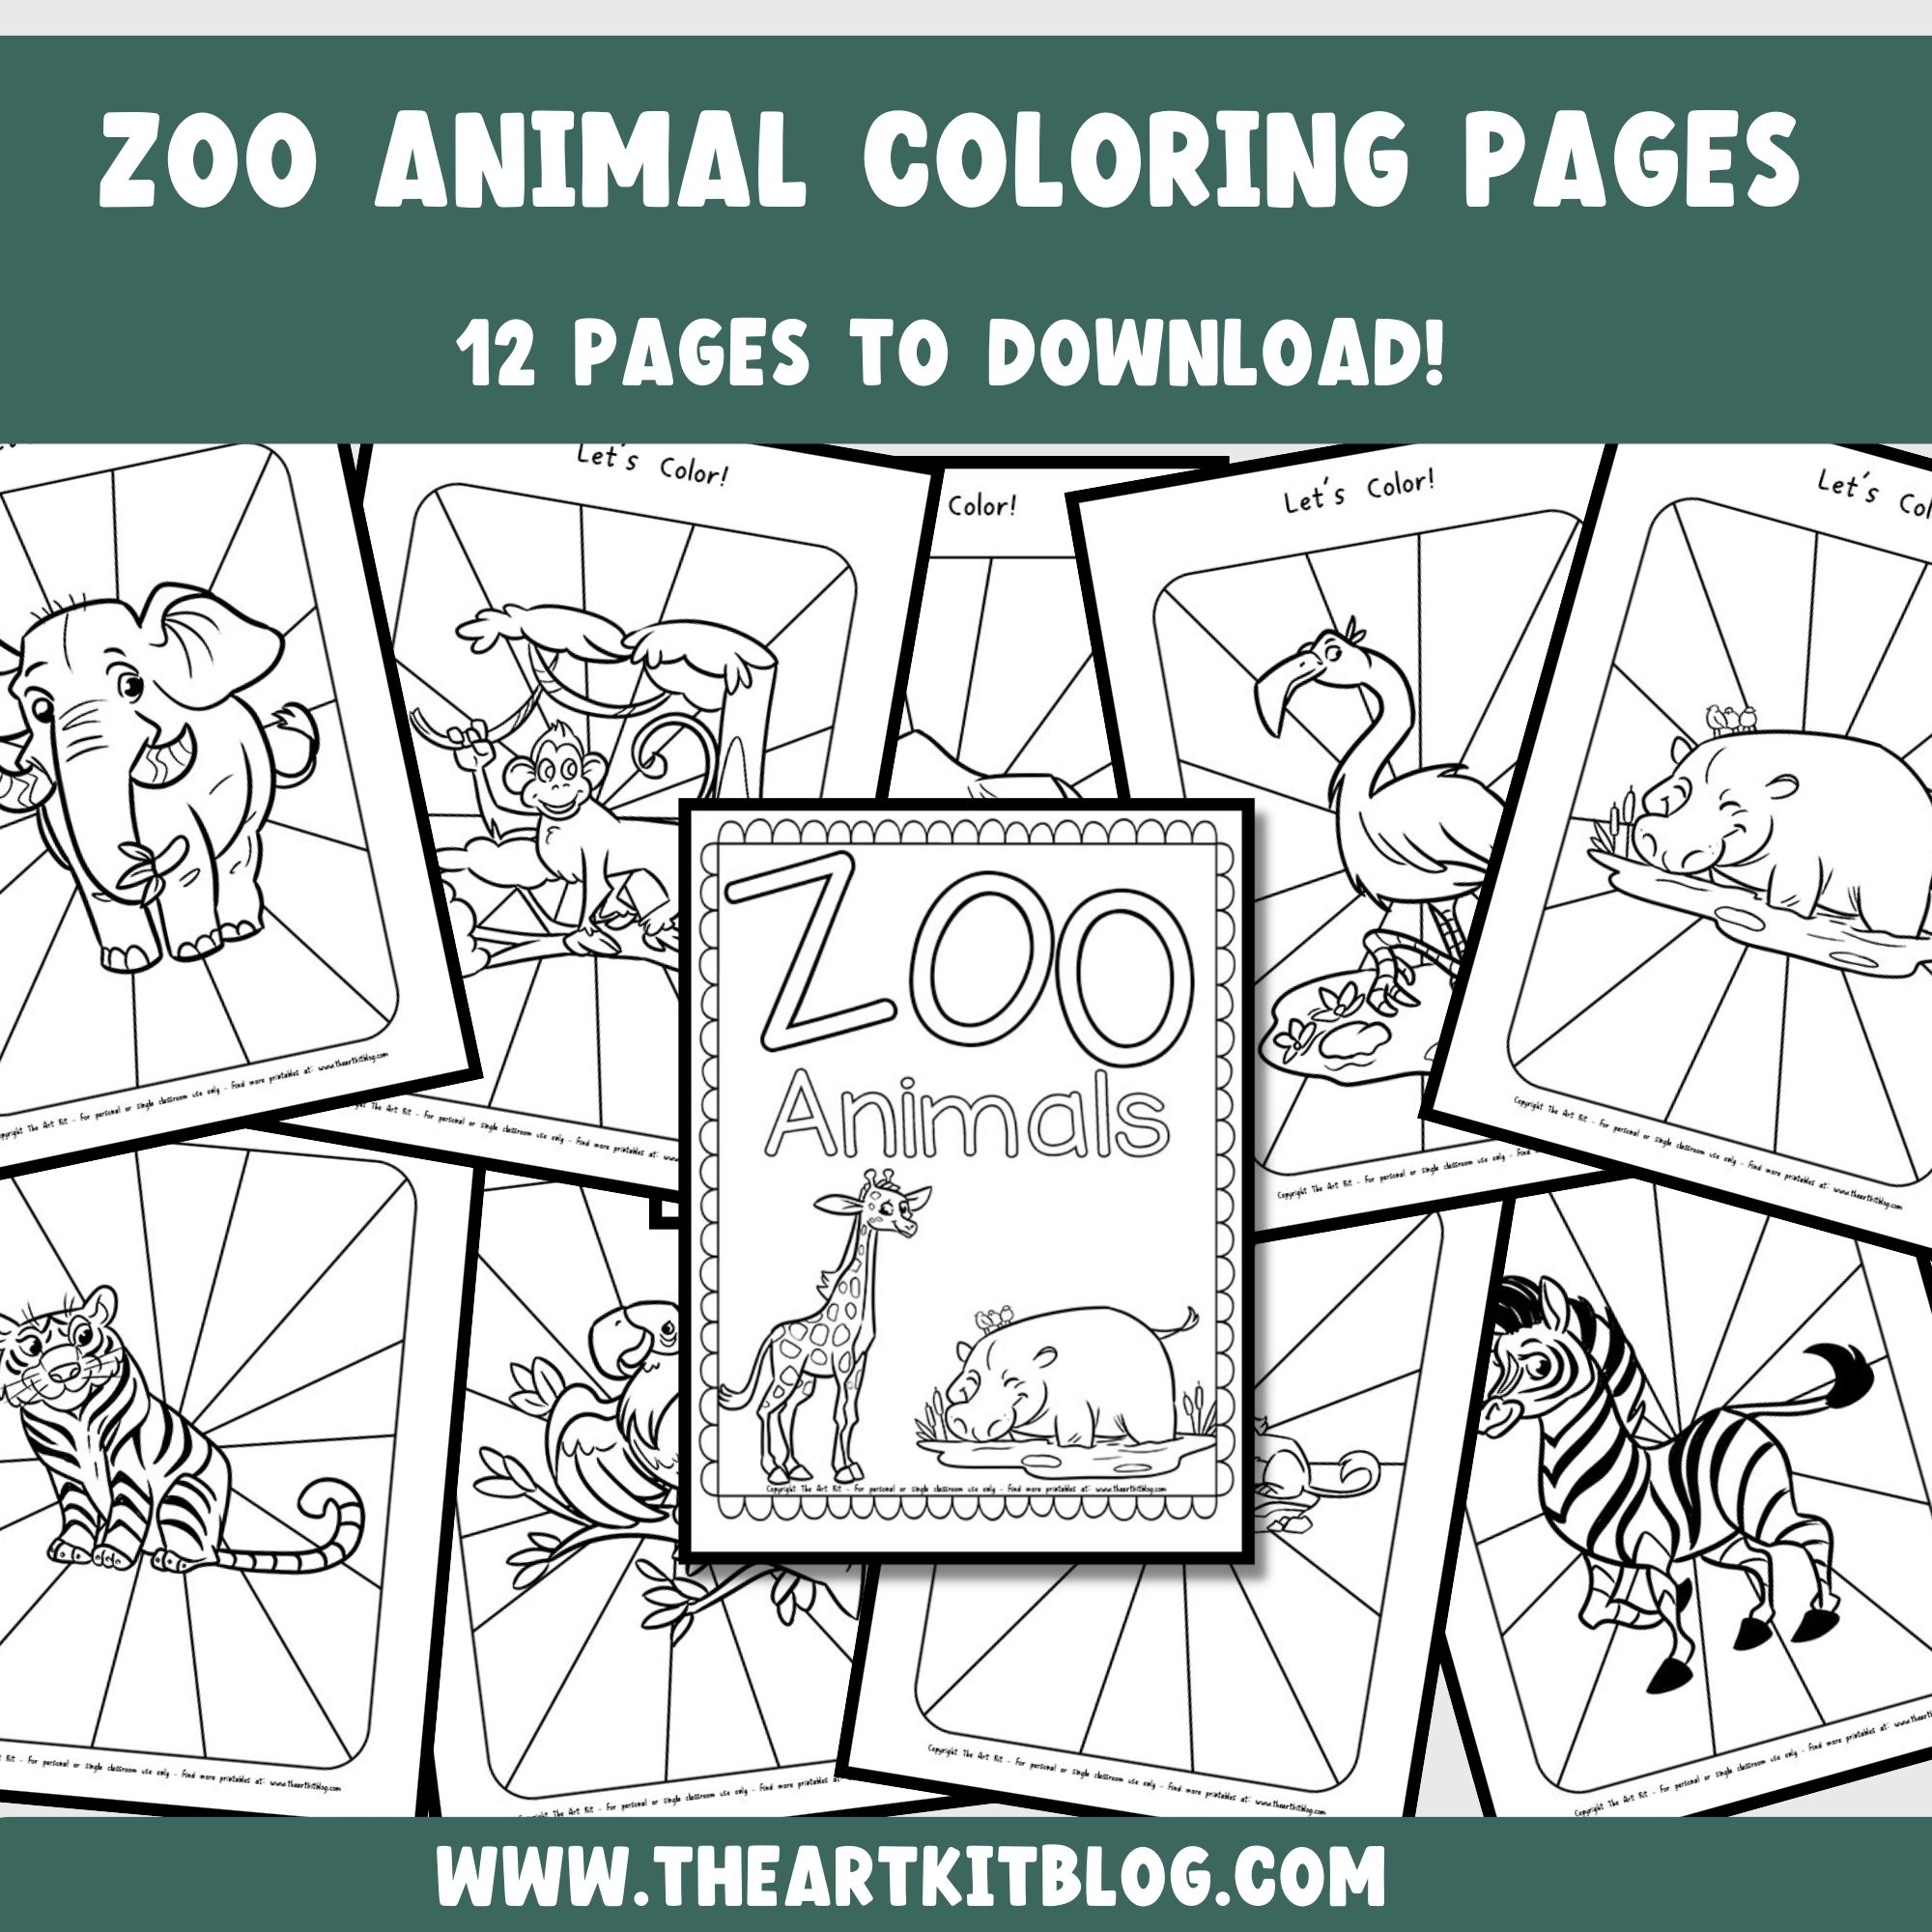 Zoo animal coloring pages â free printables â the art kit